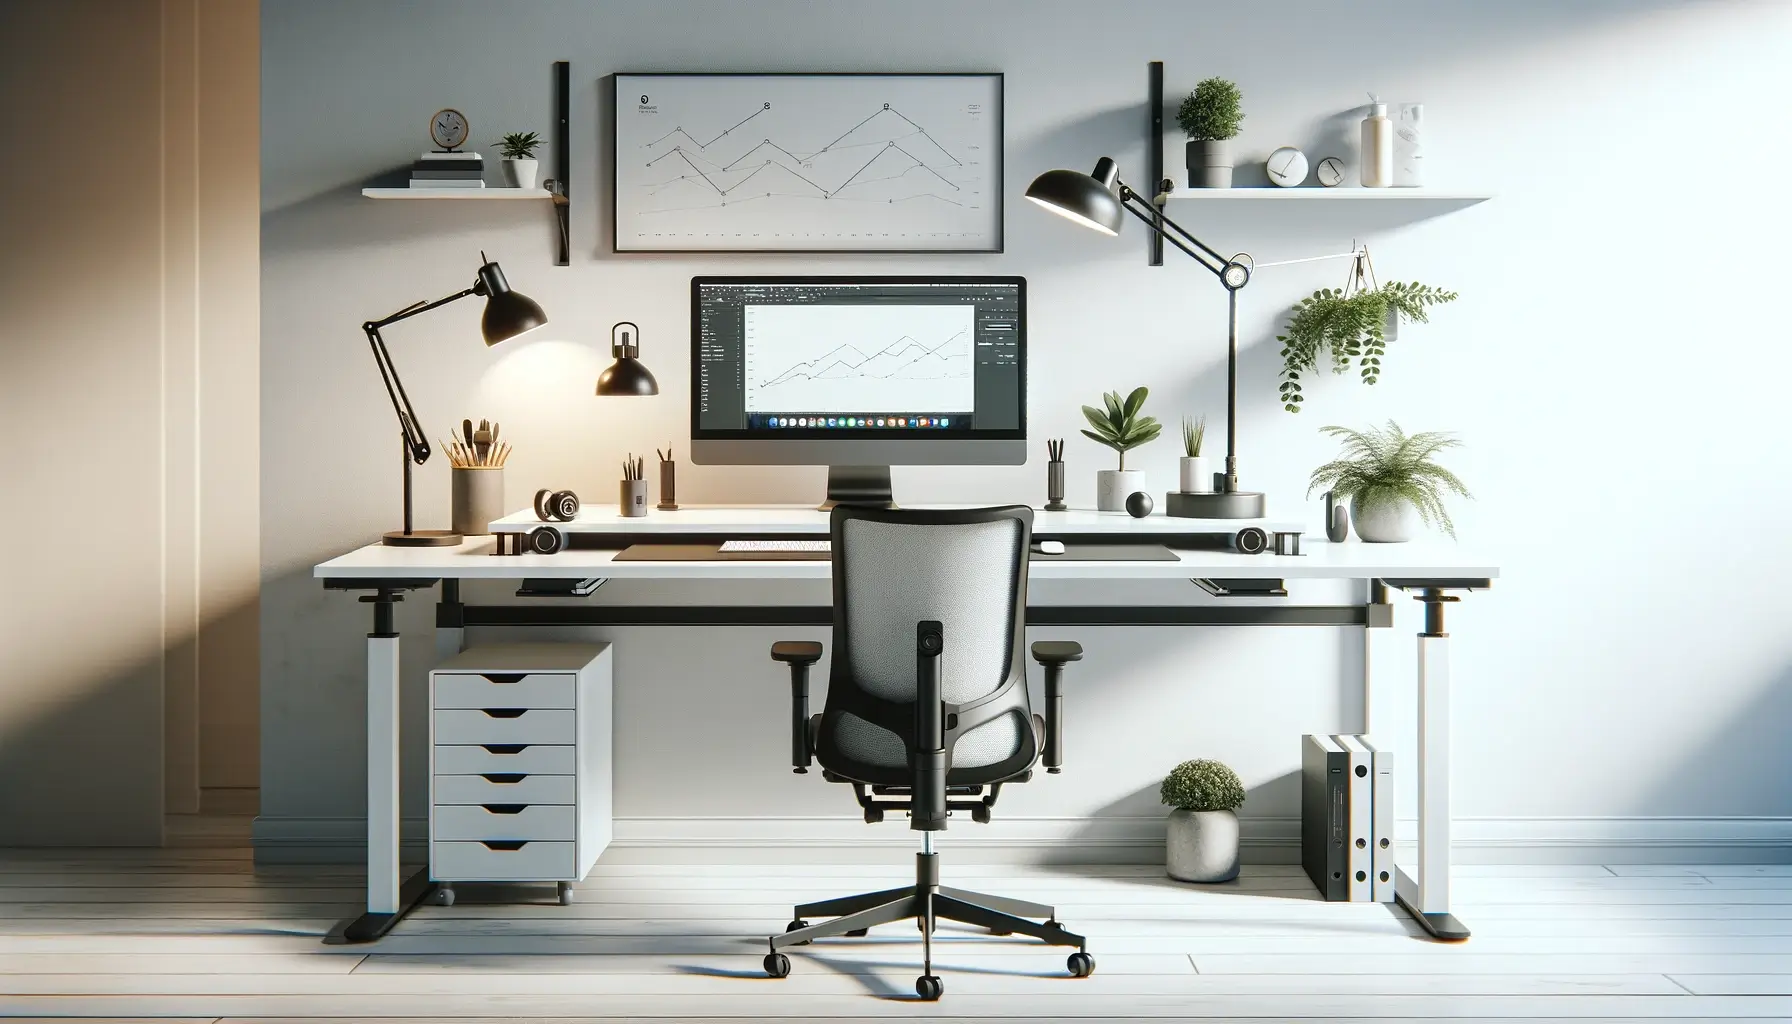 A minimalist ergonomic workspace with an adjustable standing desk, ergonomic chair, dual monitor setup, and tidy shelves adorned with plants, set against a soothing backdrop of neutral tones and natural light.